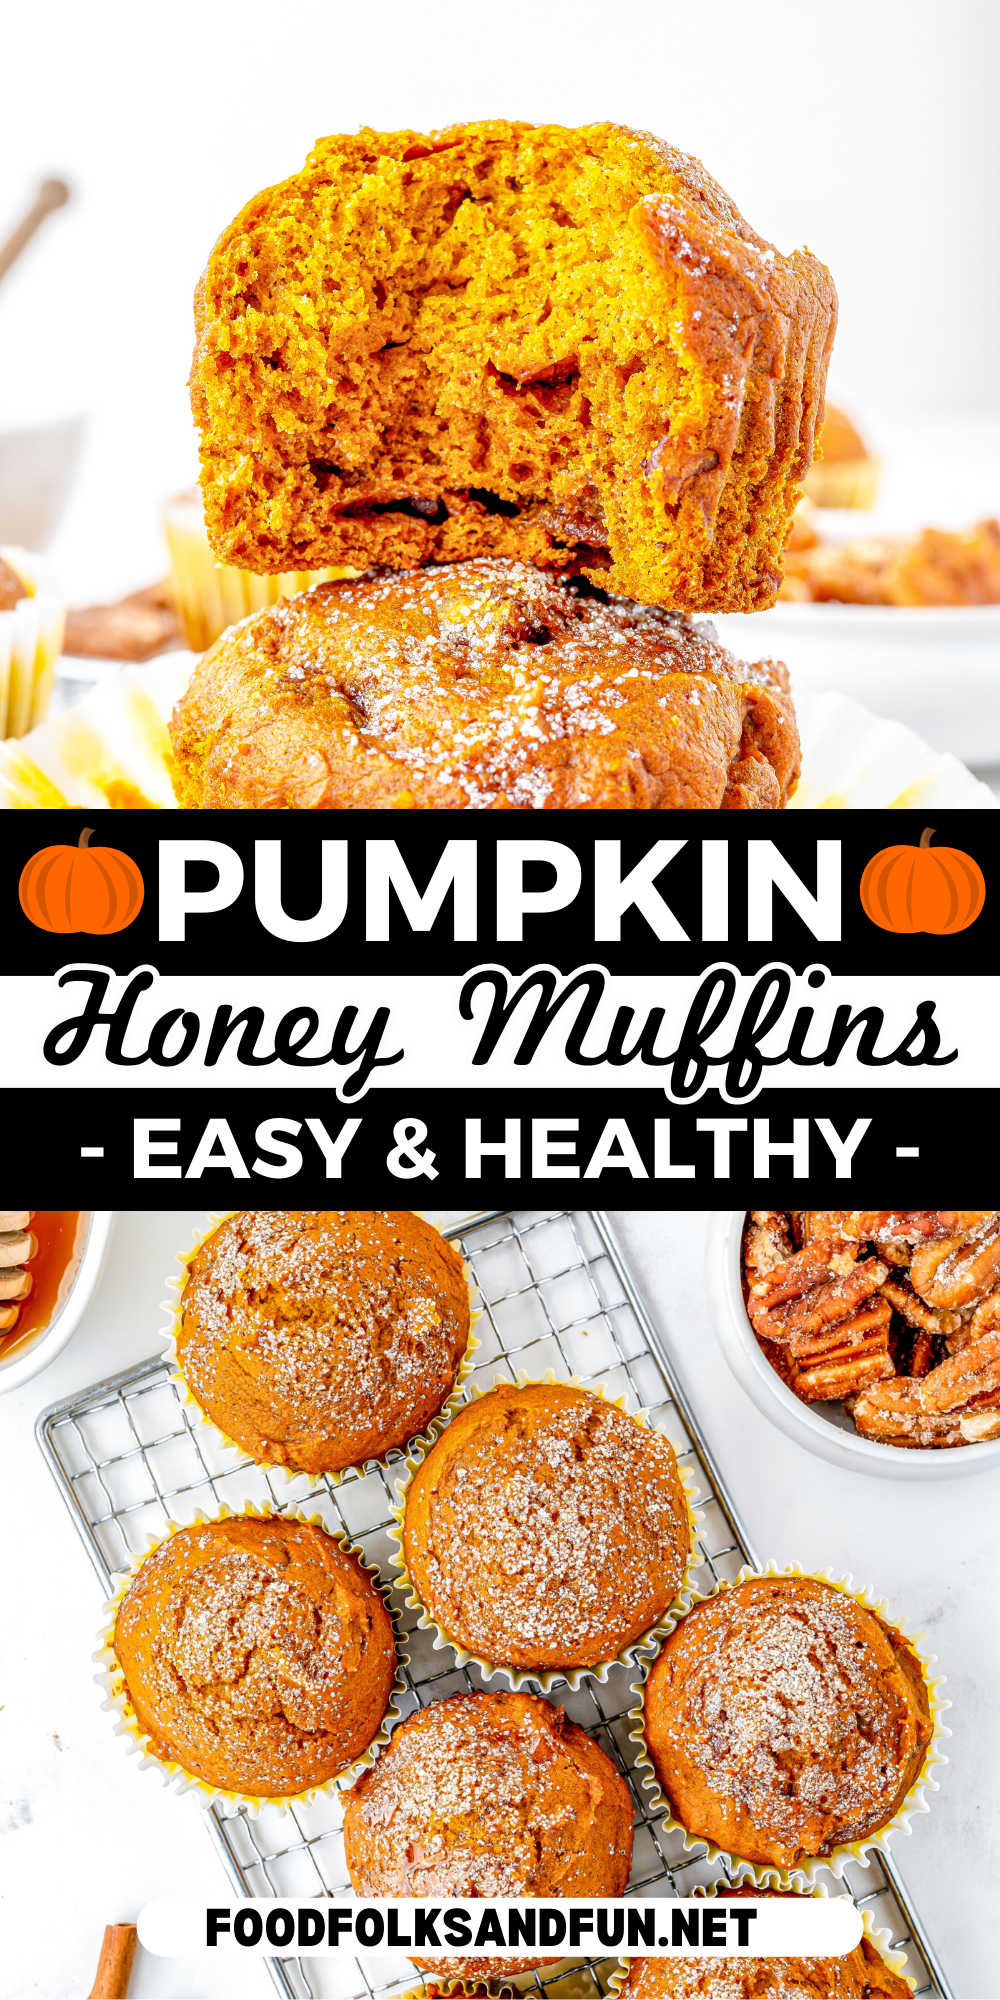 These delicious pumpkin muffins are made with honey instead of sugar, making them a healthier breakfast or snack option. They are also quick and easy to make, perfect for busy weekdays or special occasions. via @foodfolksandfun